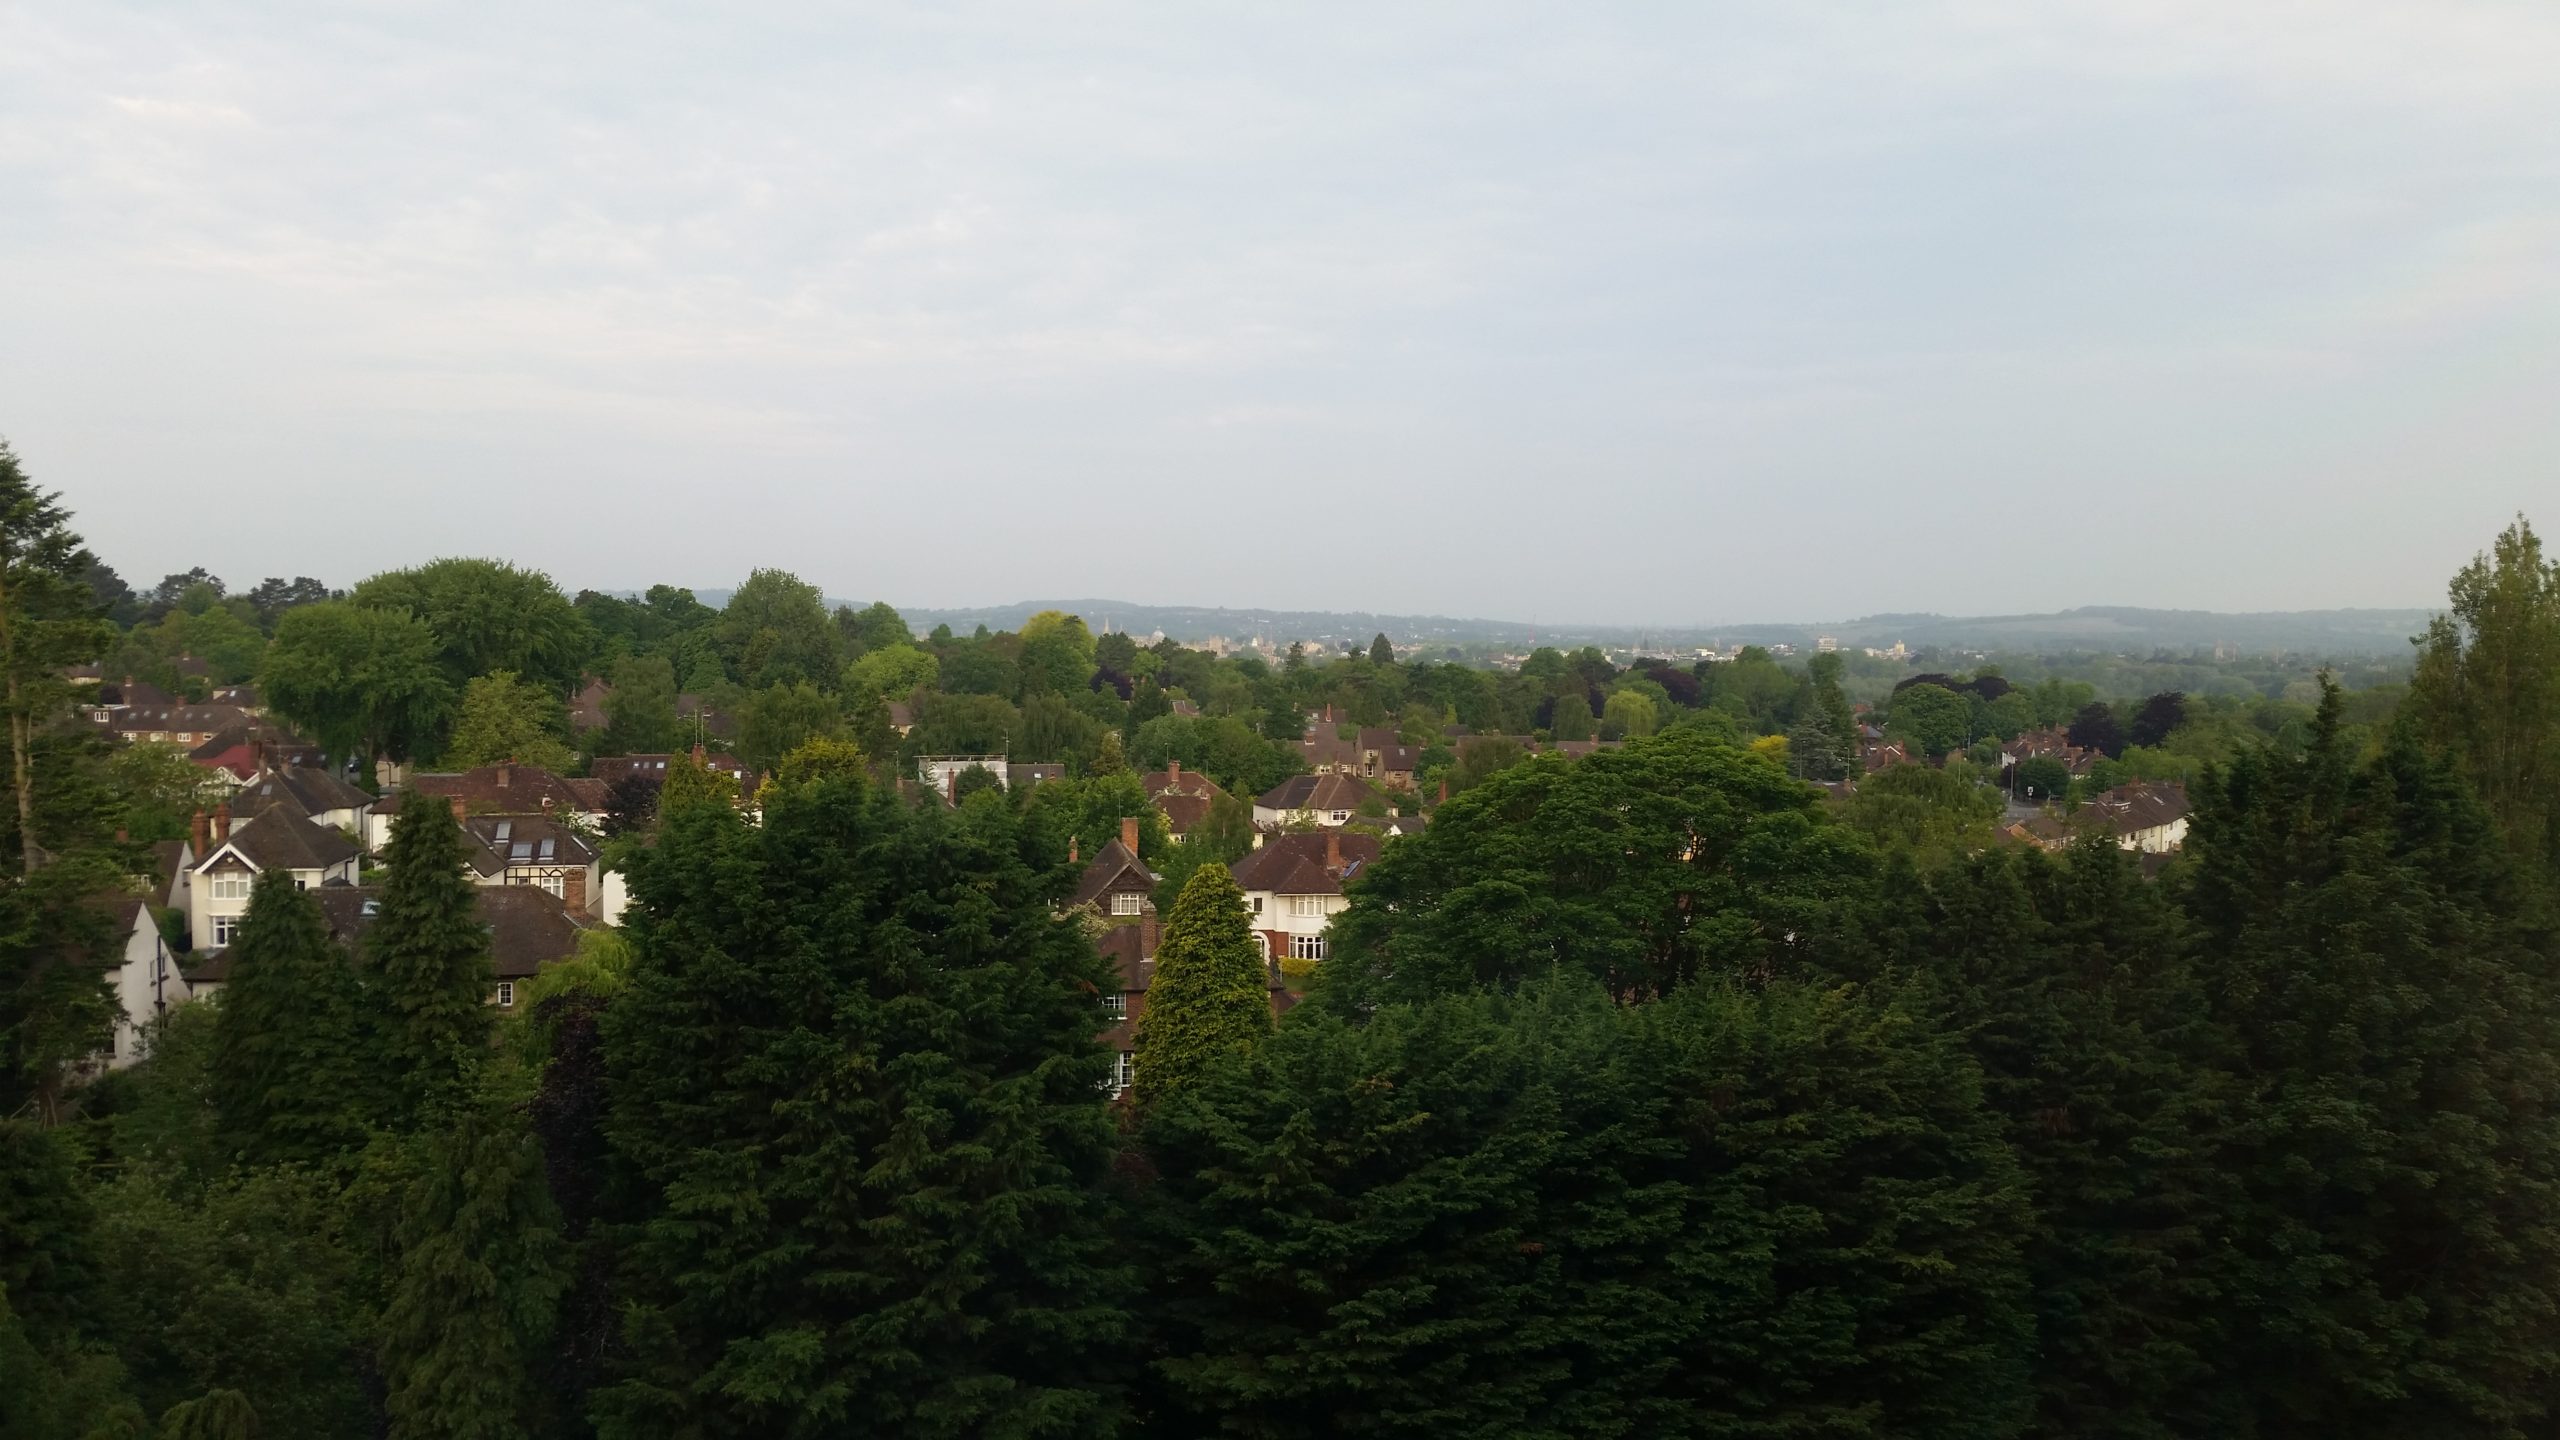 The view from my hospital ward window: Oxford city is visible in the distance.